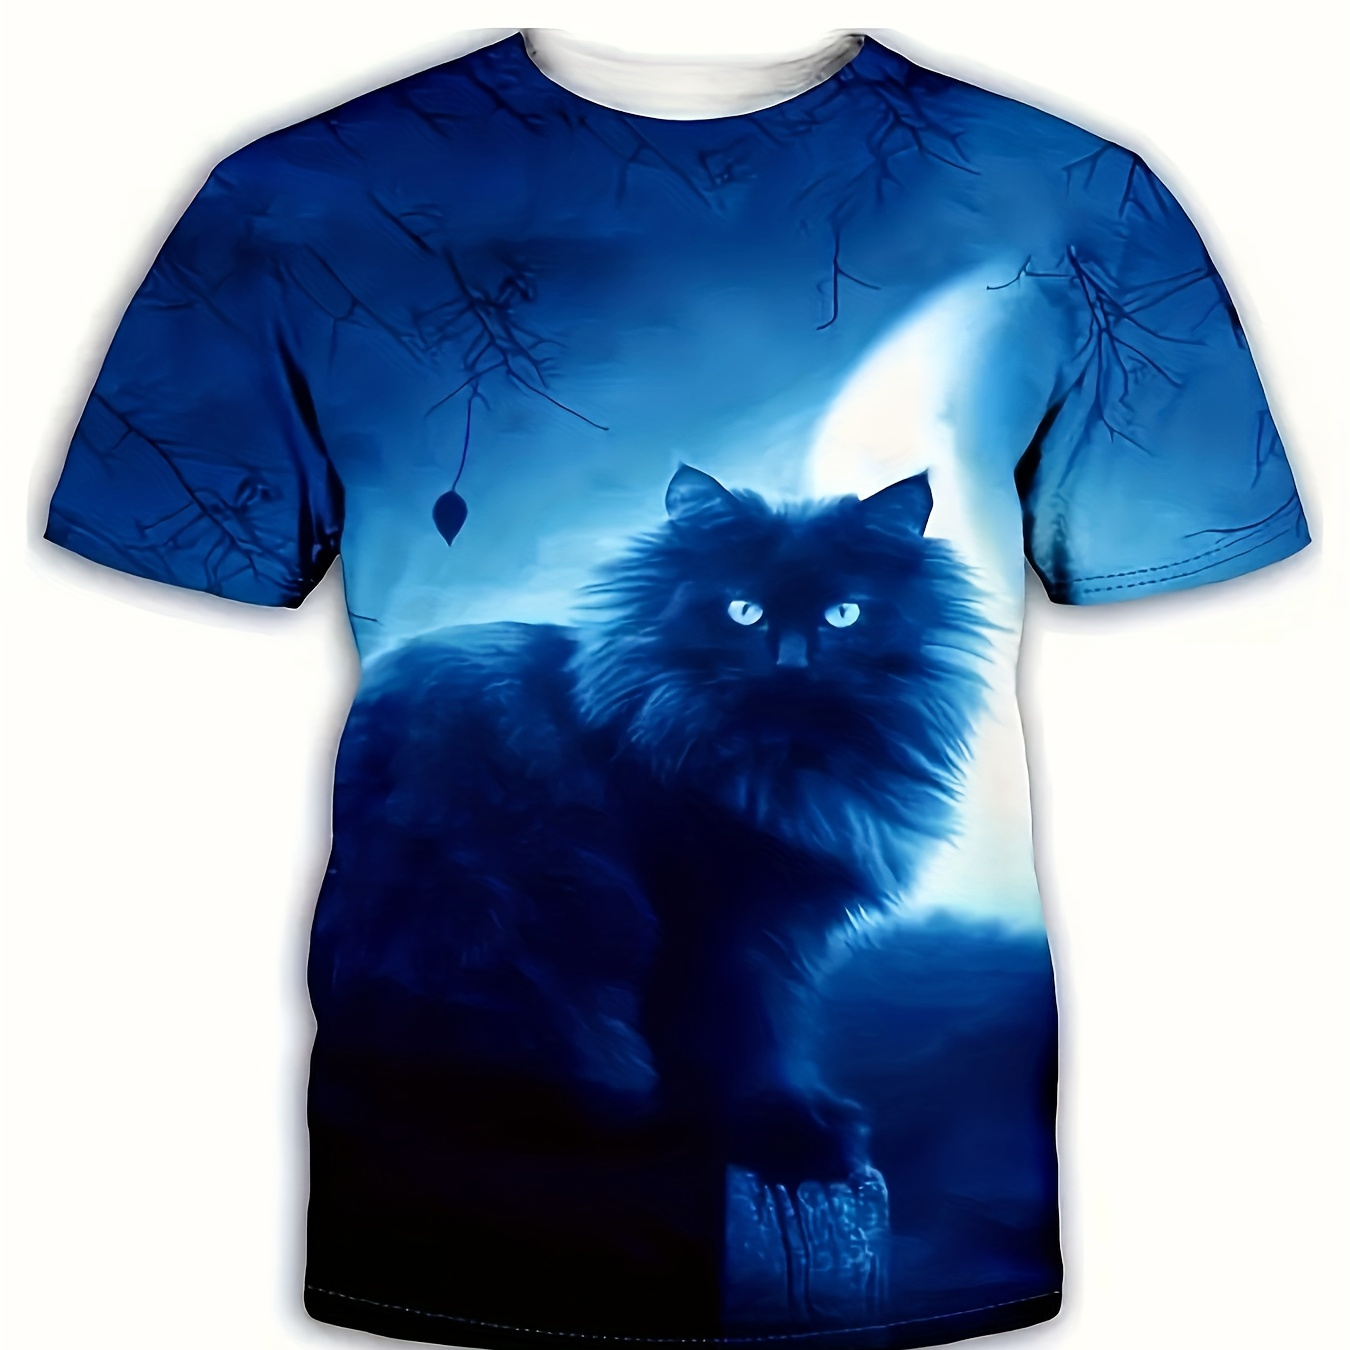 

Men's Trendy Casual Crew Neck Graphic T-shirt With Exquisite 3d Cat Prints For Summer Daily Wear